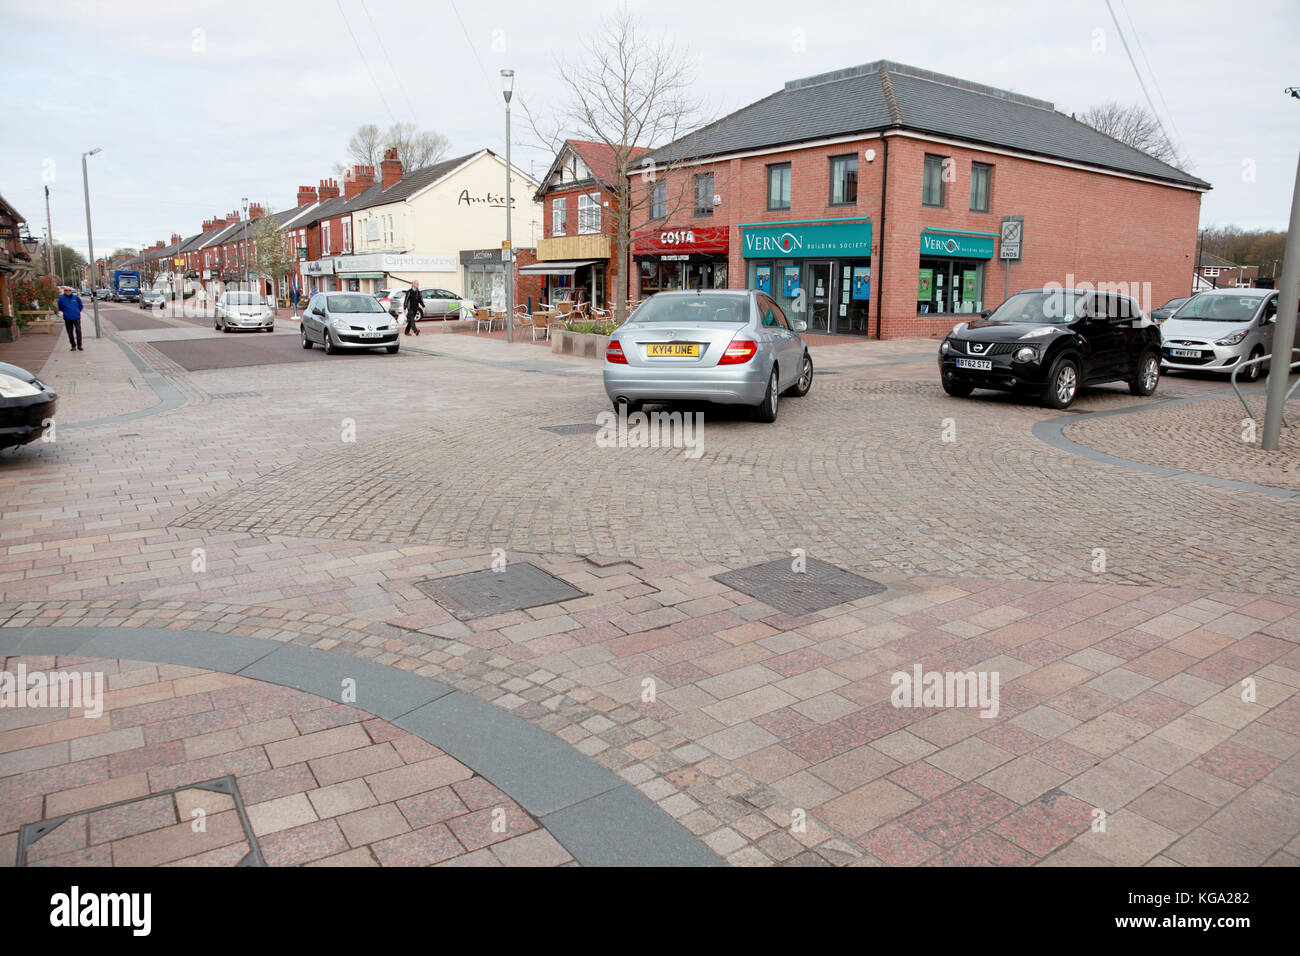 Part of the shared space traffic engineering project in Poynton, Cheshire with no formal roundabout Stock Photo